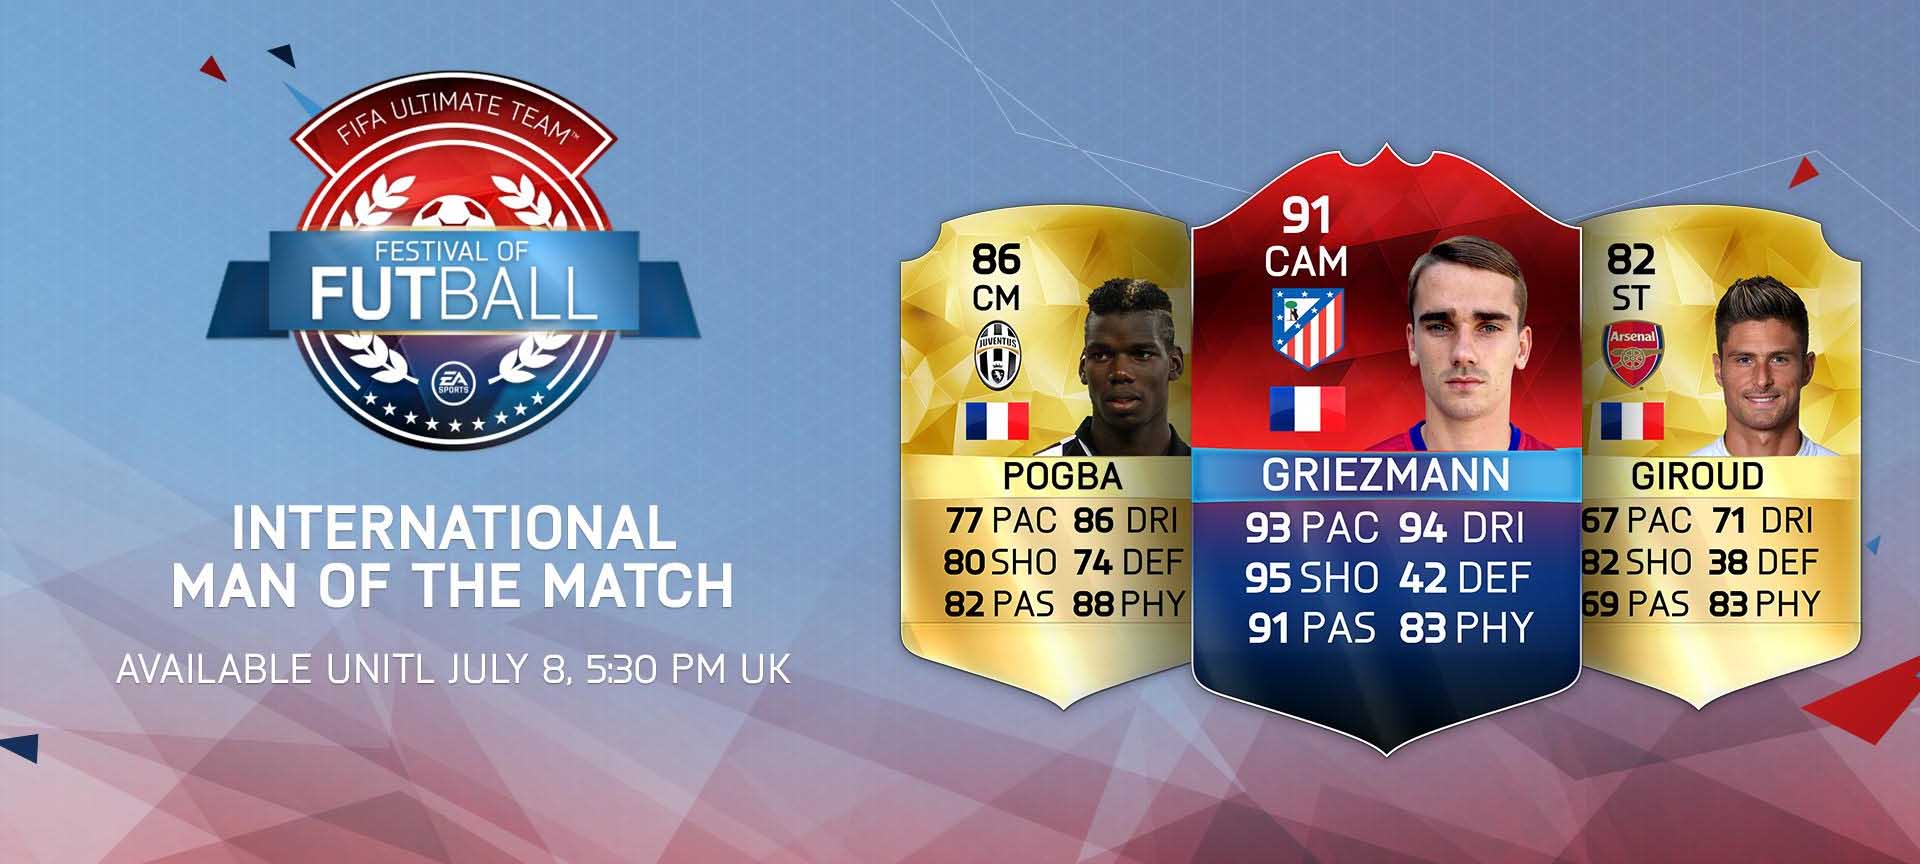 International Man of the Match - All FIFA 17 iMOTM Cards